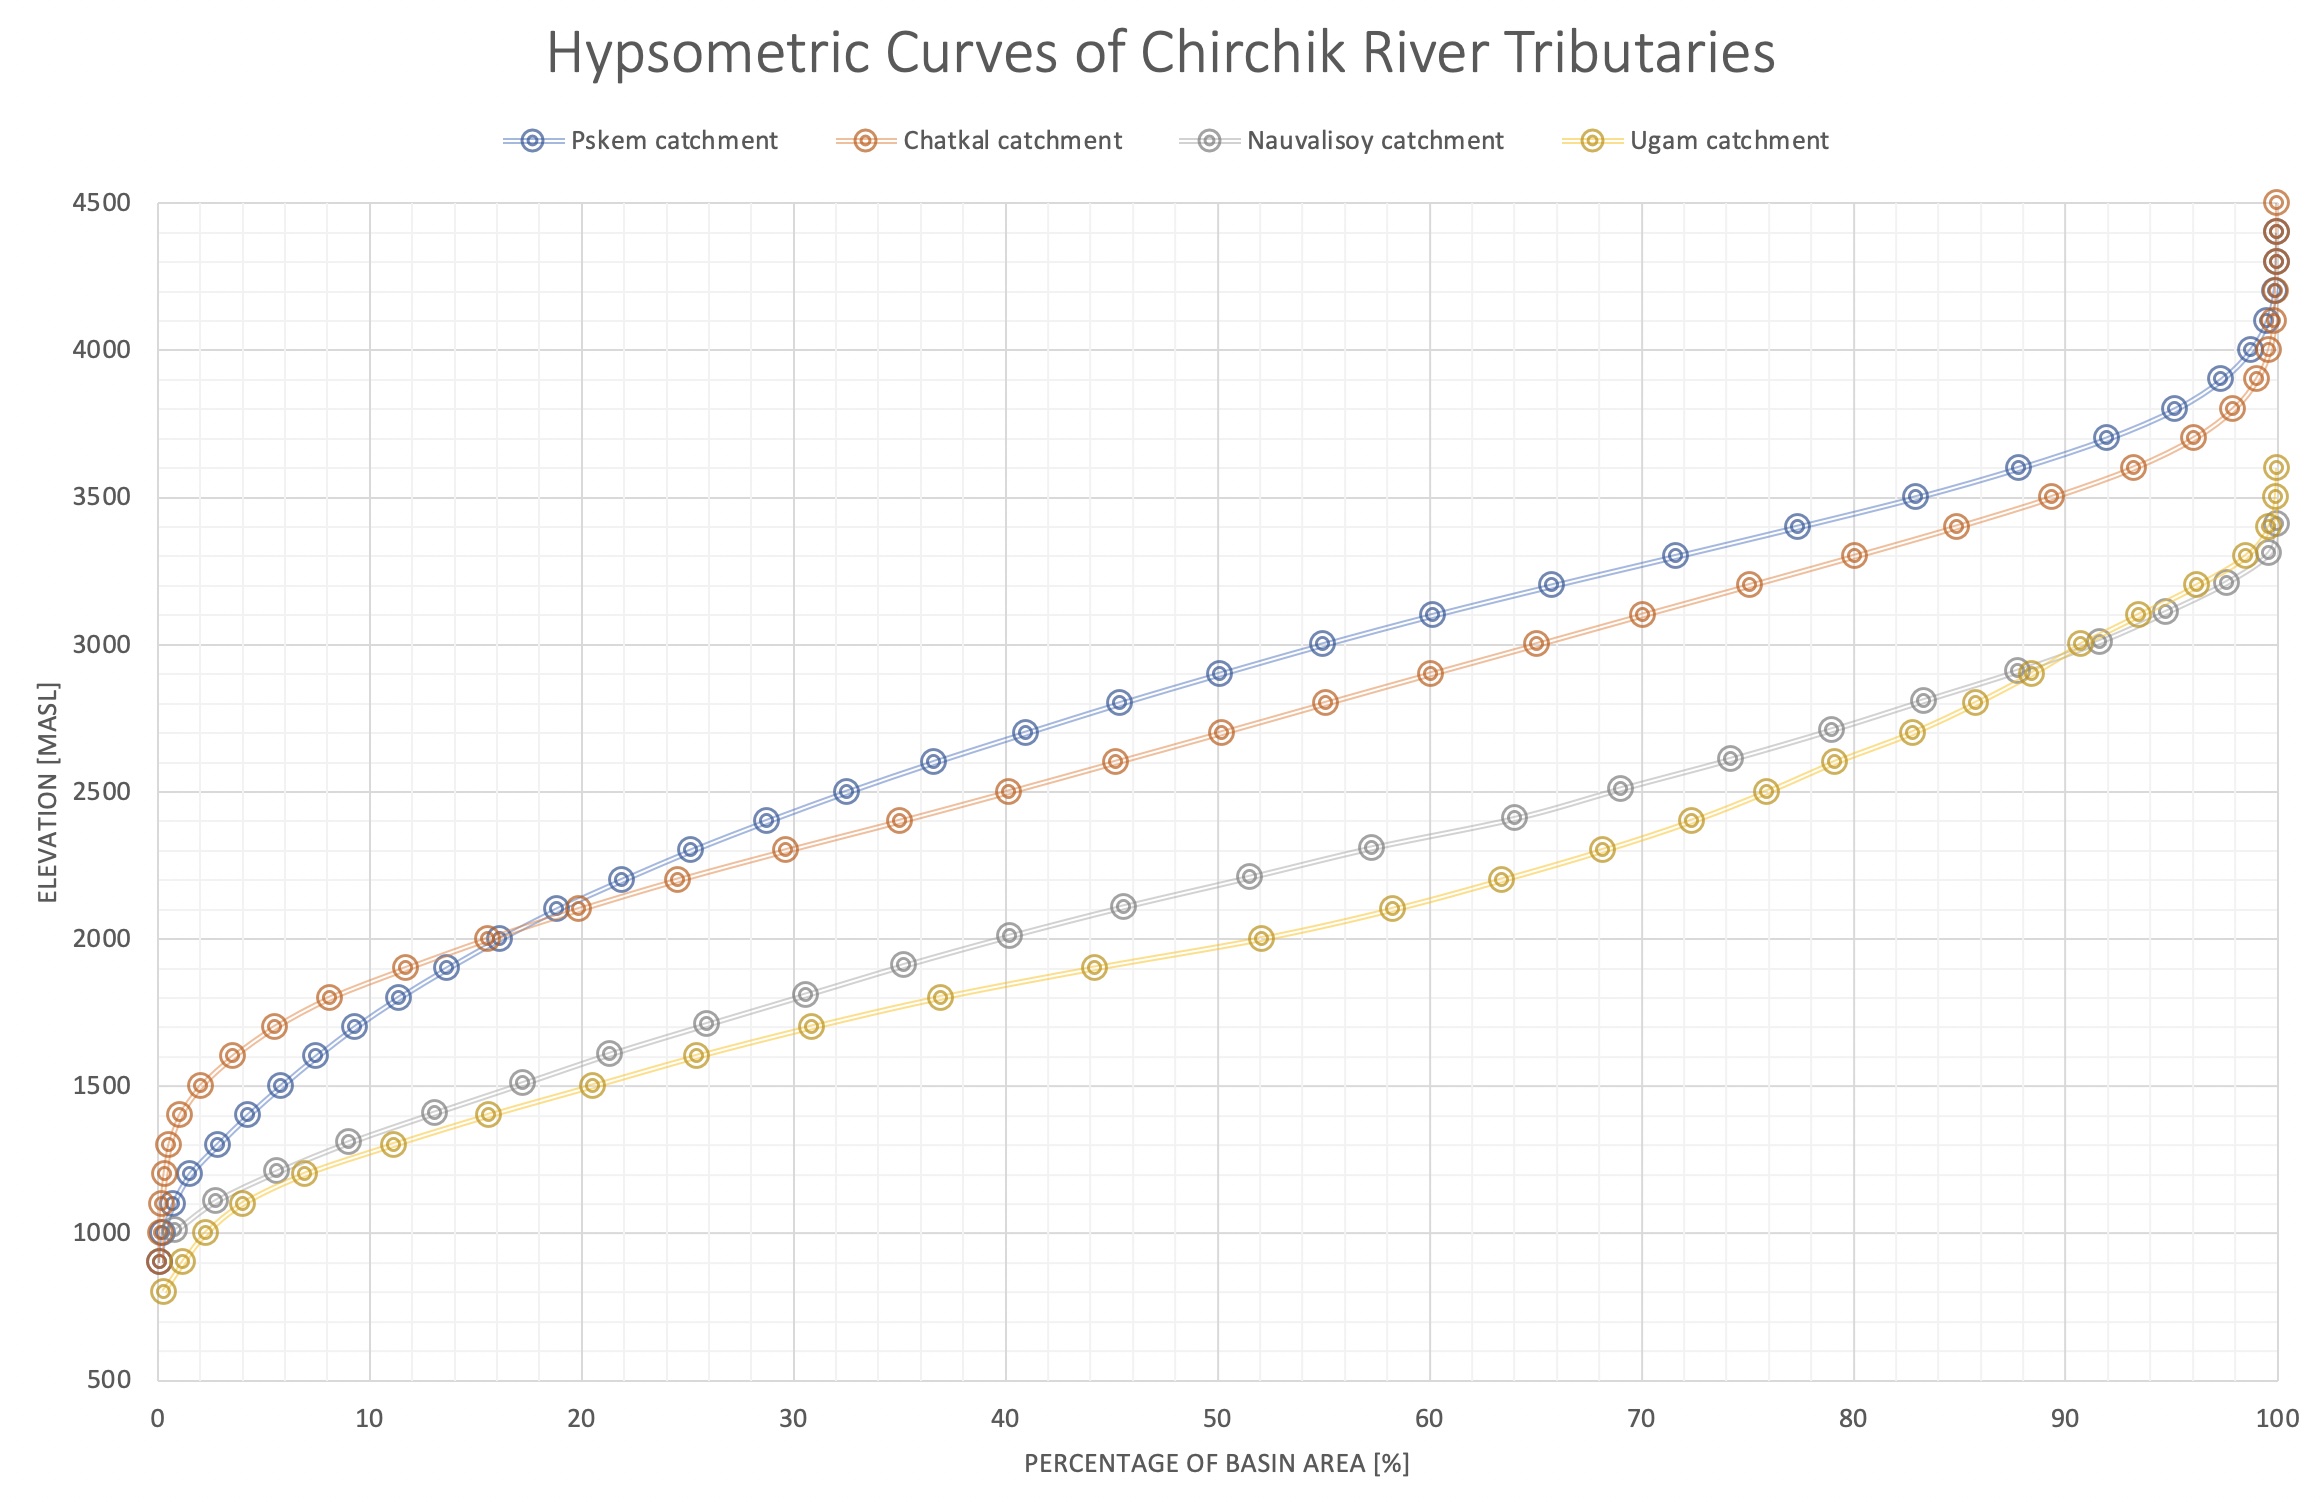 Hypsometric Curves of the tributaries to the Chirchik River Basin.